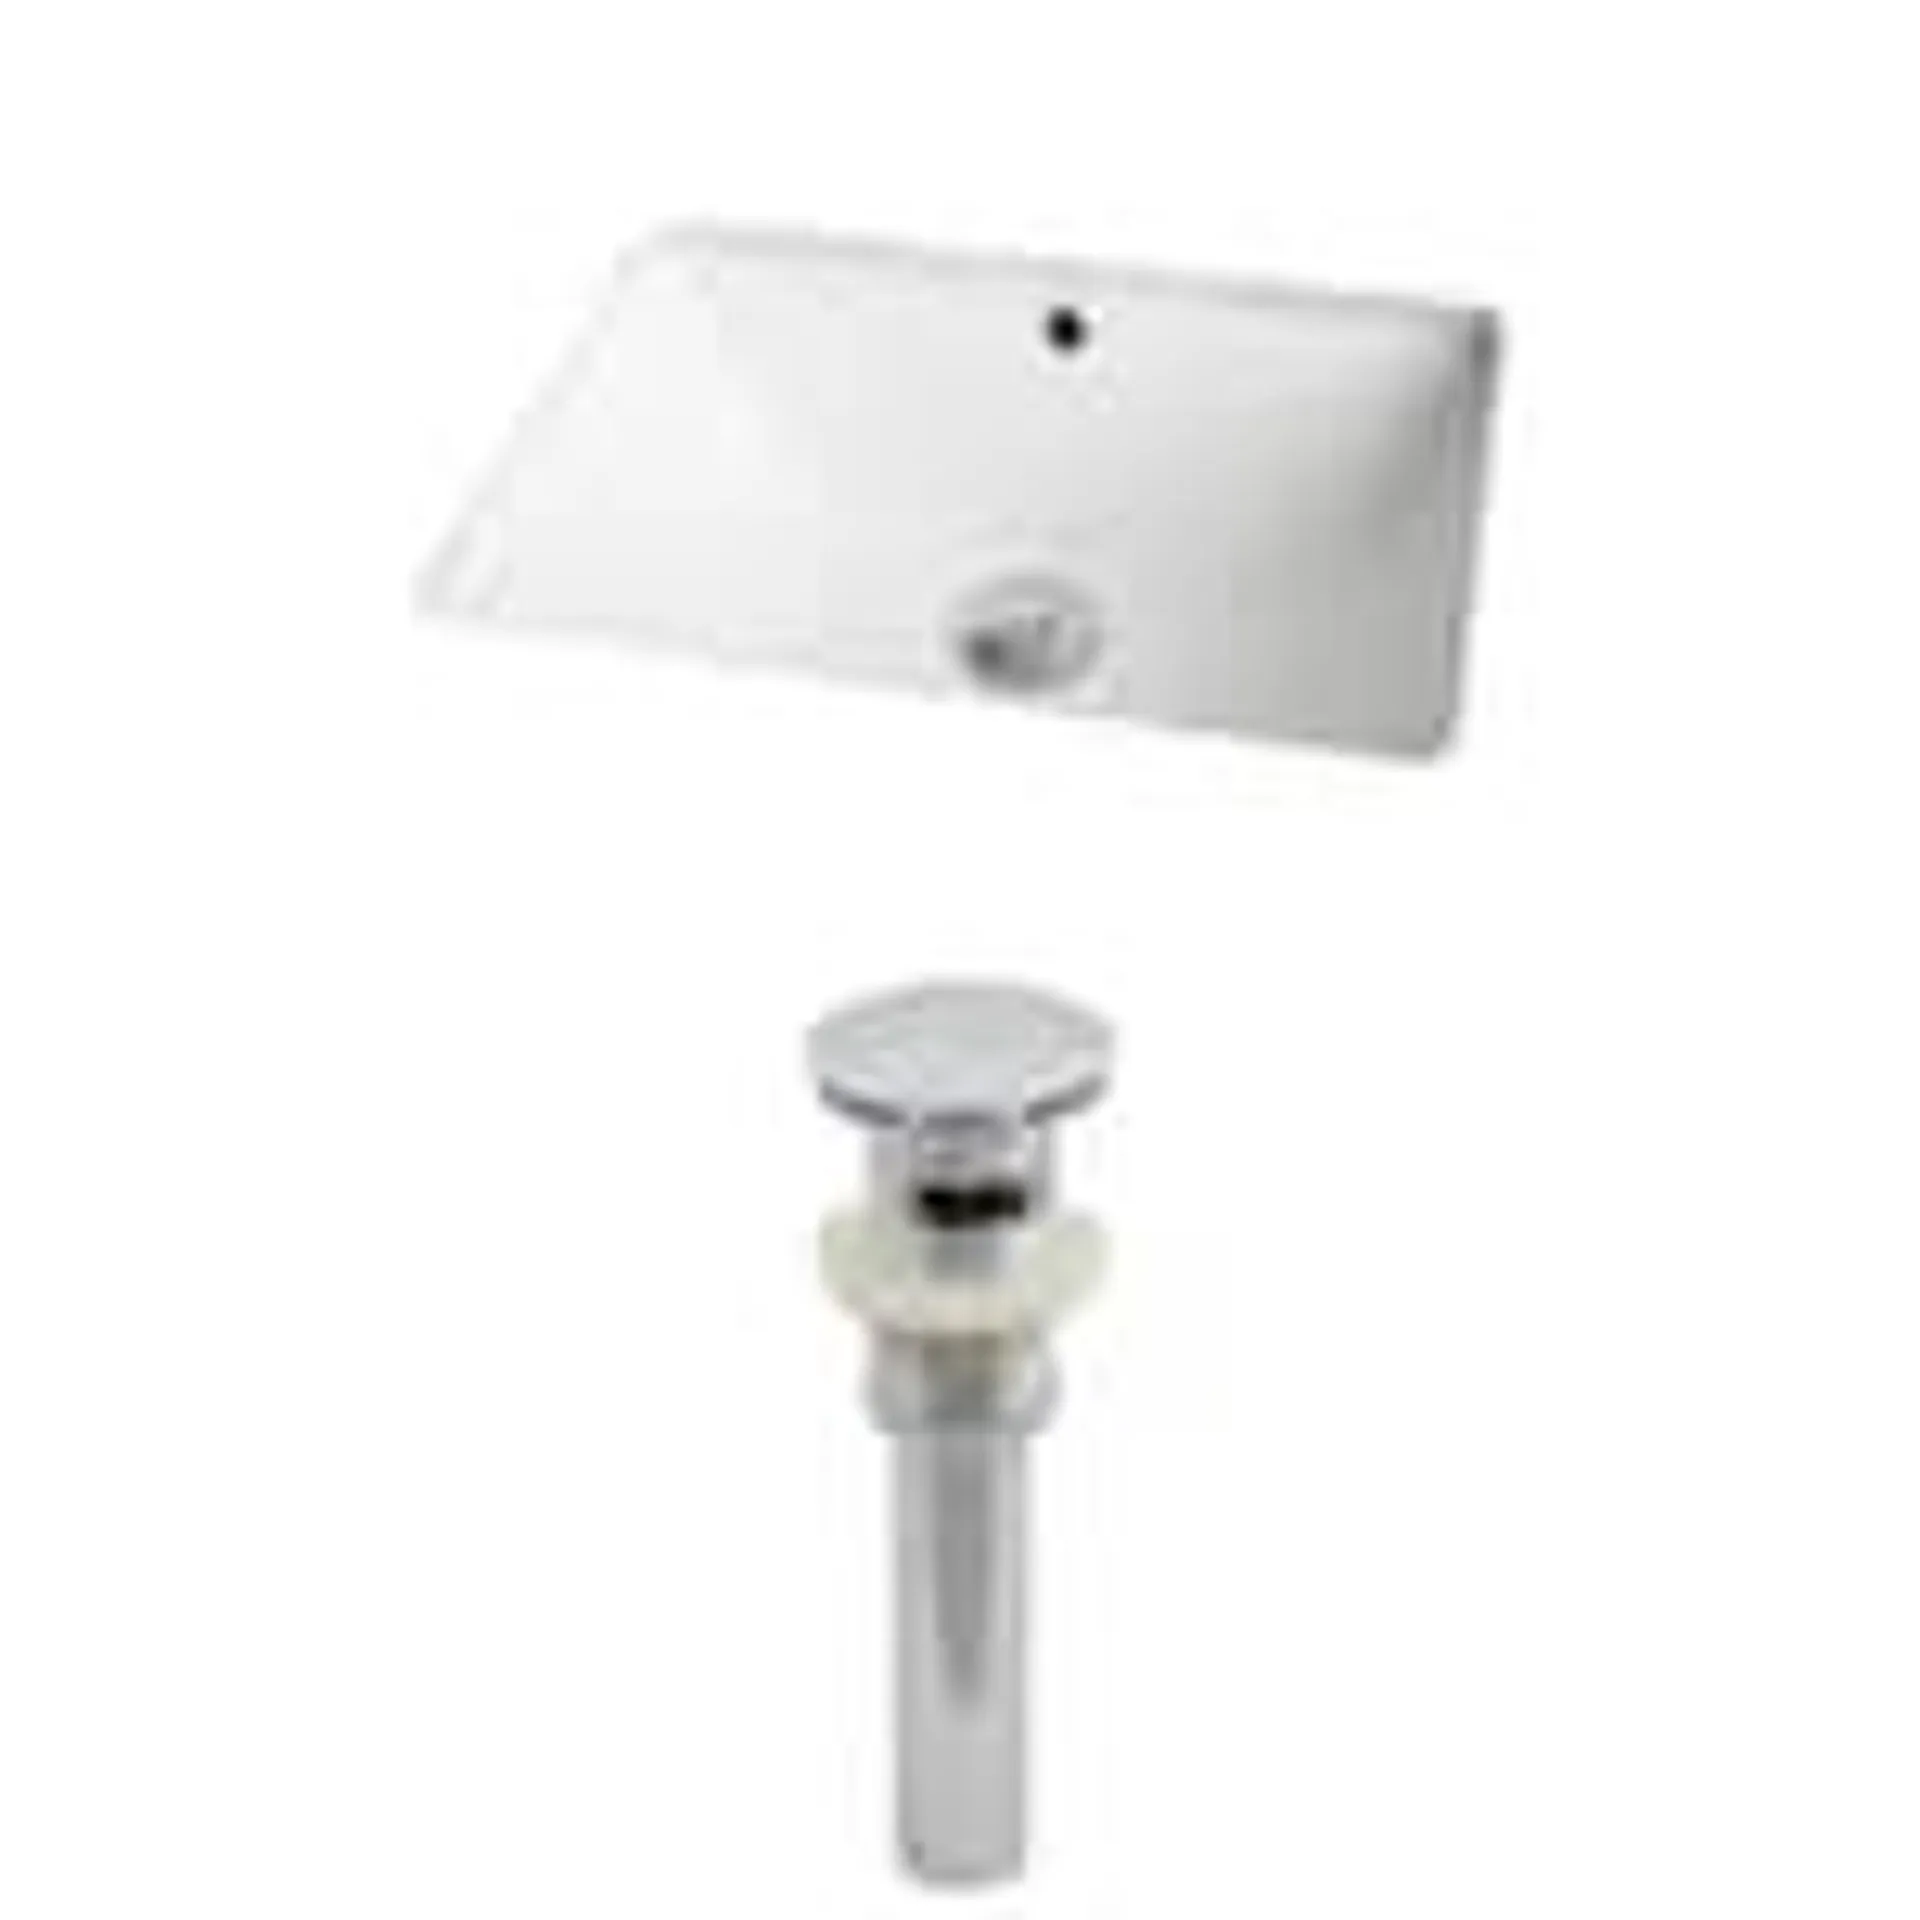 18.25-in. W CUPC Rectangle Bathroom Undermount Sink Set In White - Chrome Hardware - Overflow Drain Incl. AI-12817